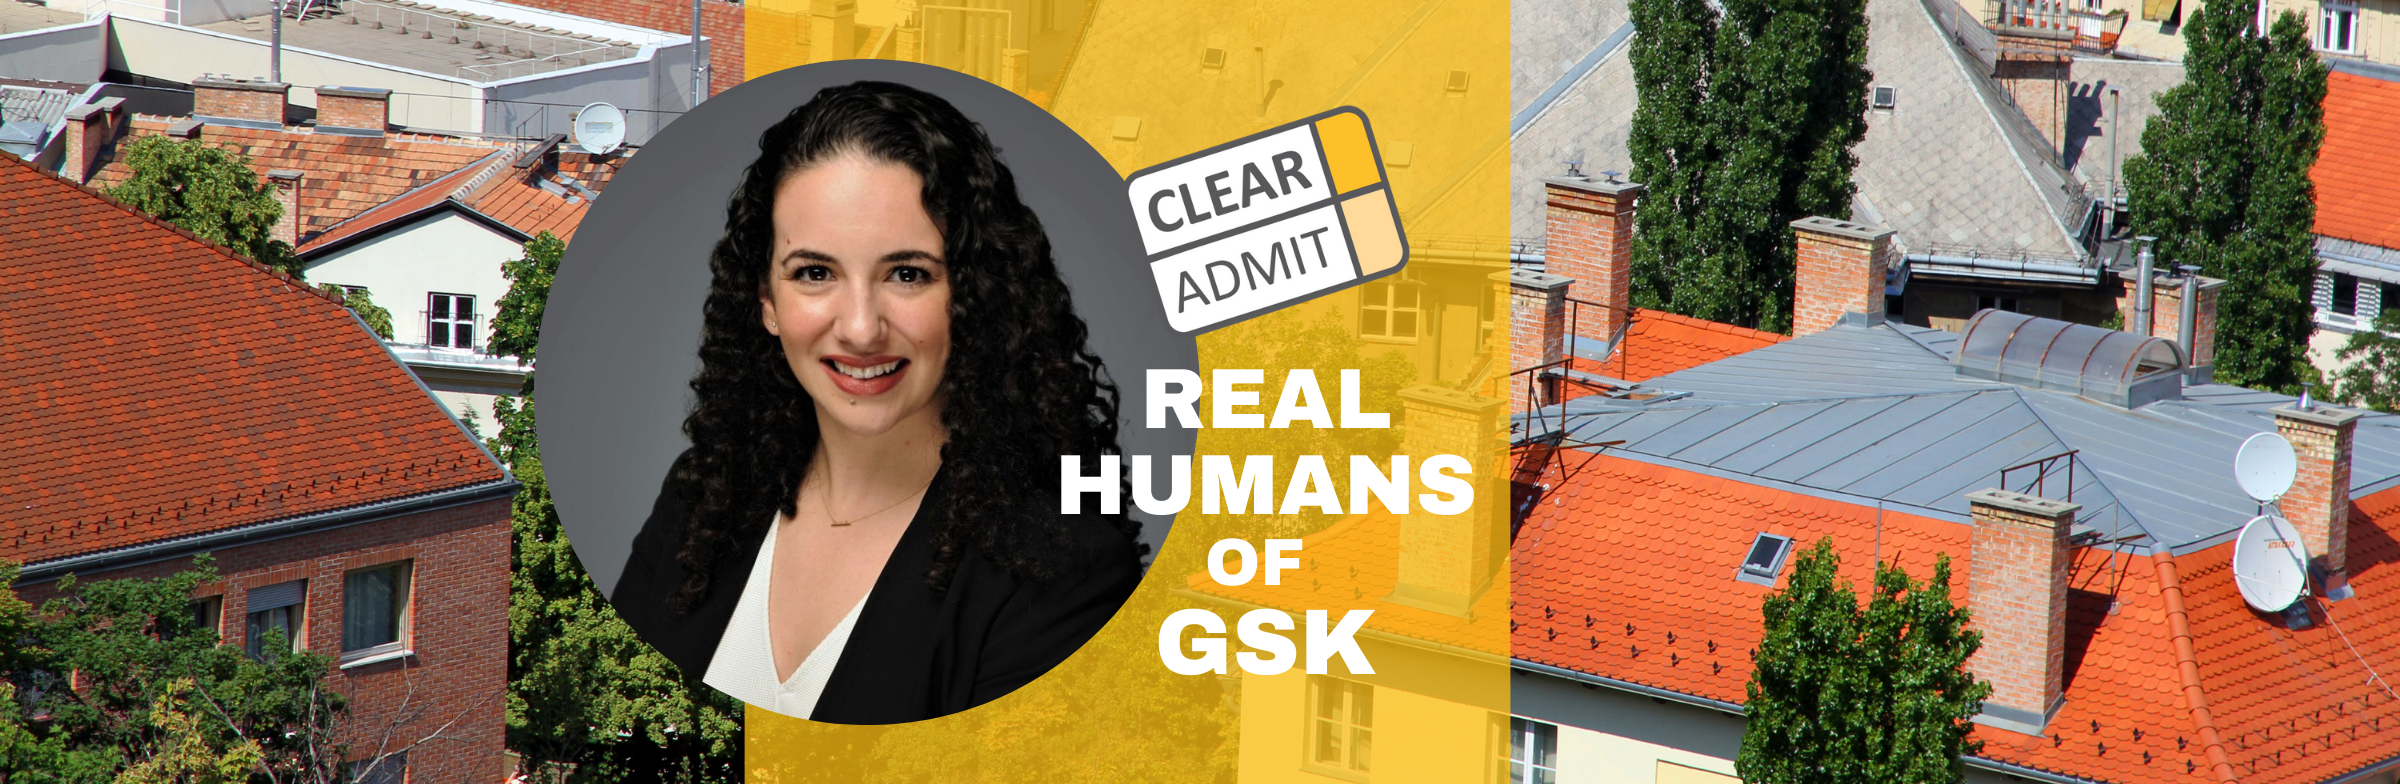 Image for Real Humans of GSK: Carrie Salmon, NYU Stern ‘19, Associate Brand Manager, Sensodyne Franchise